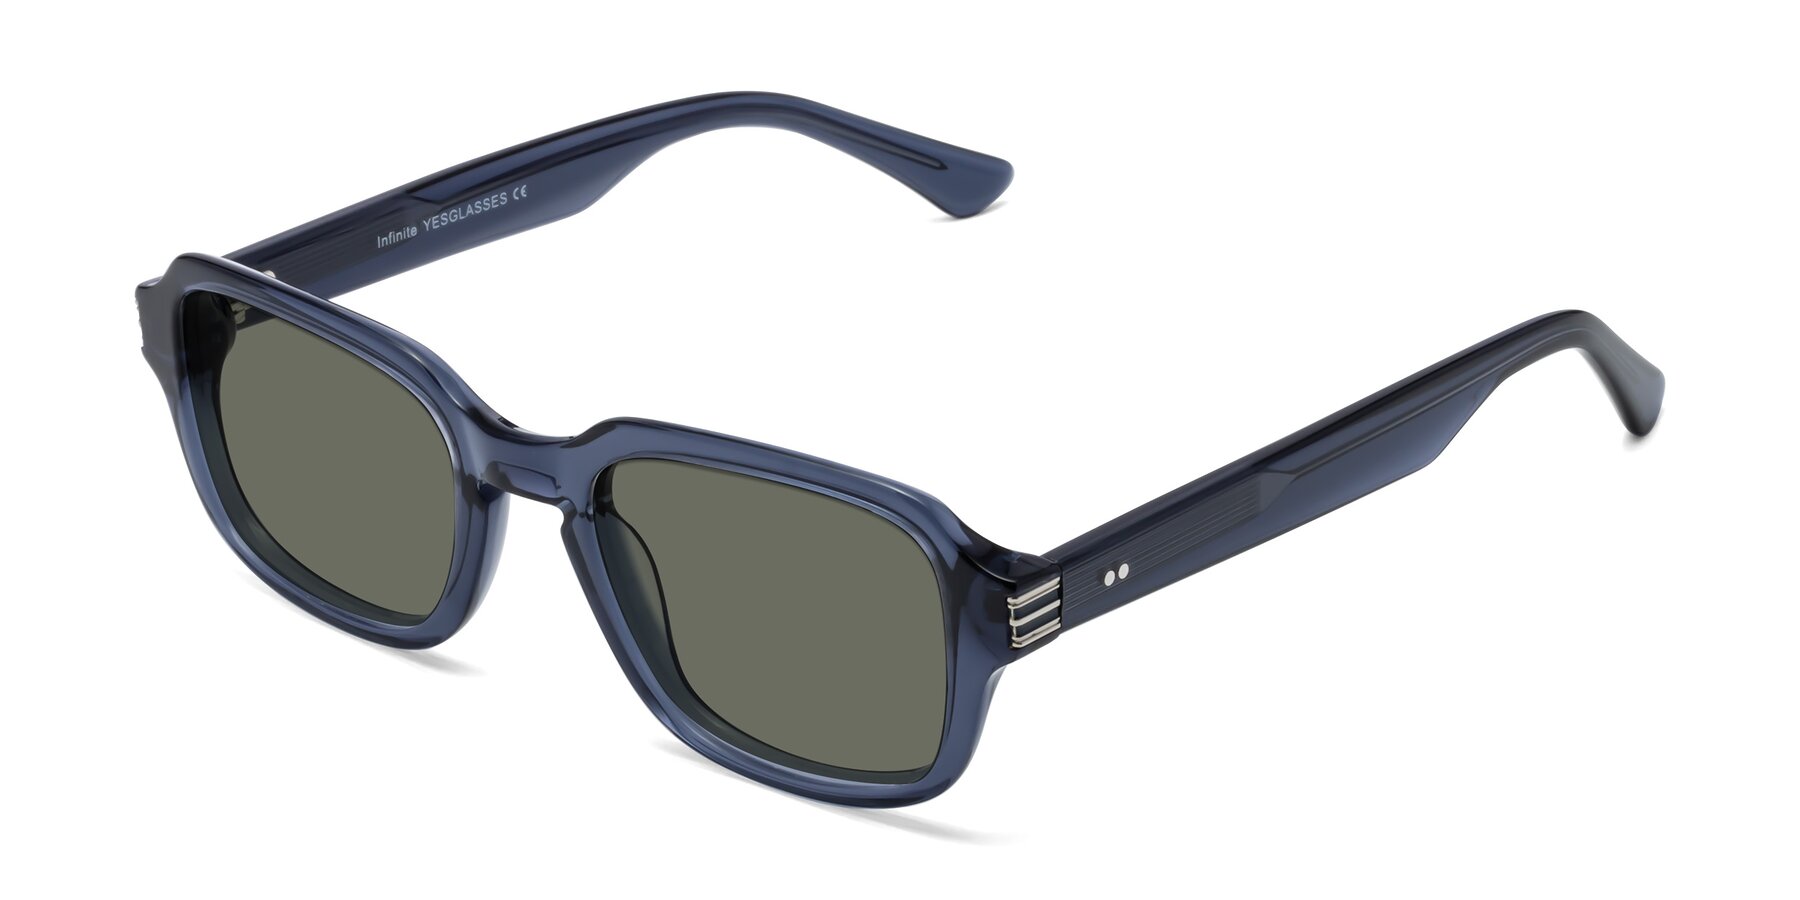 Angle of Infinite in Dark Blue with Gray Polarized Lenses